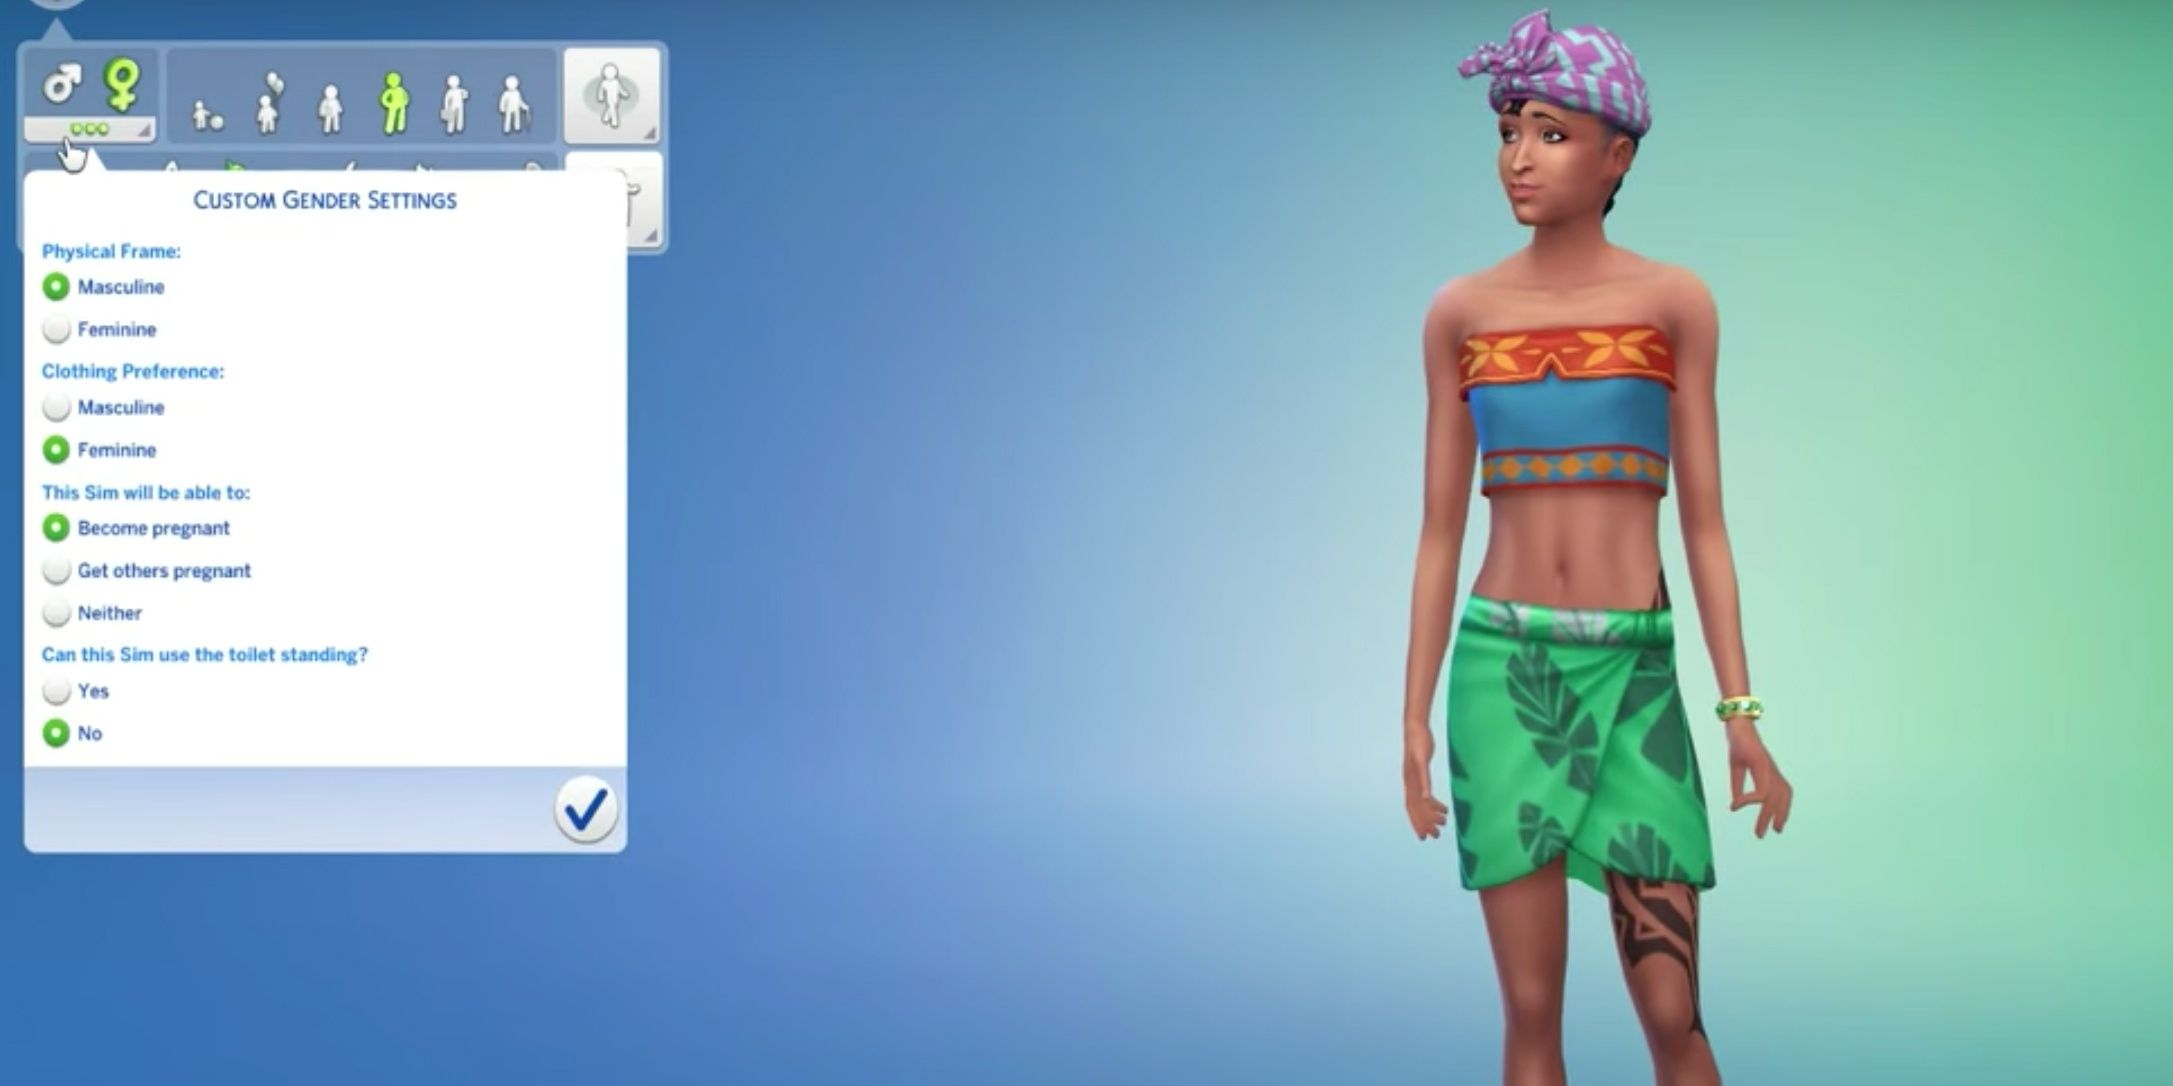 Character creation in The Sims 4